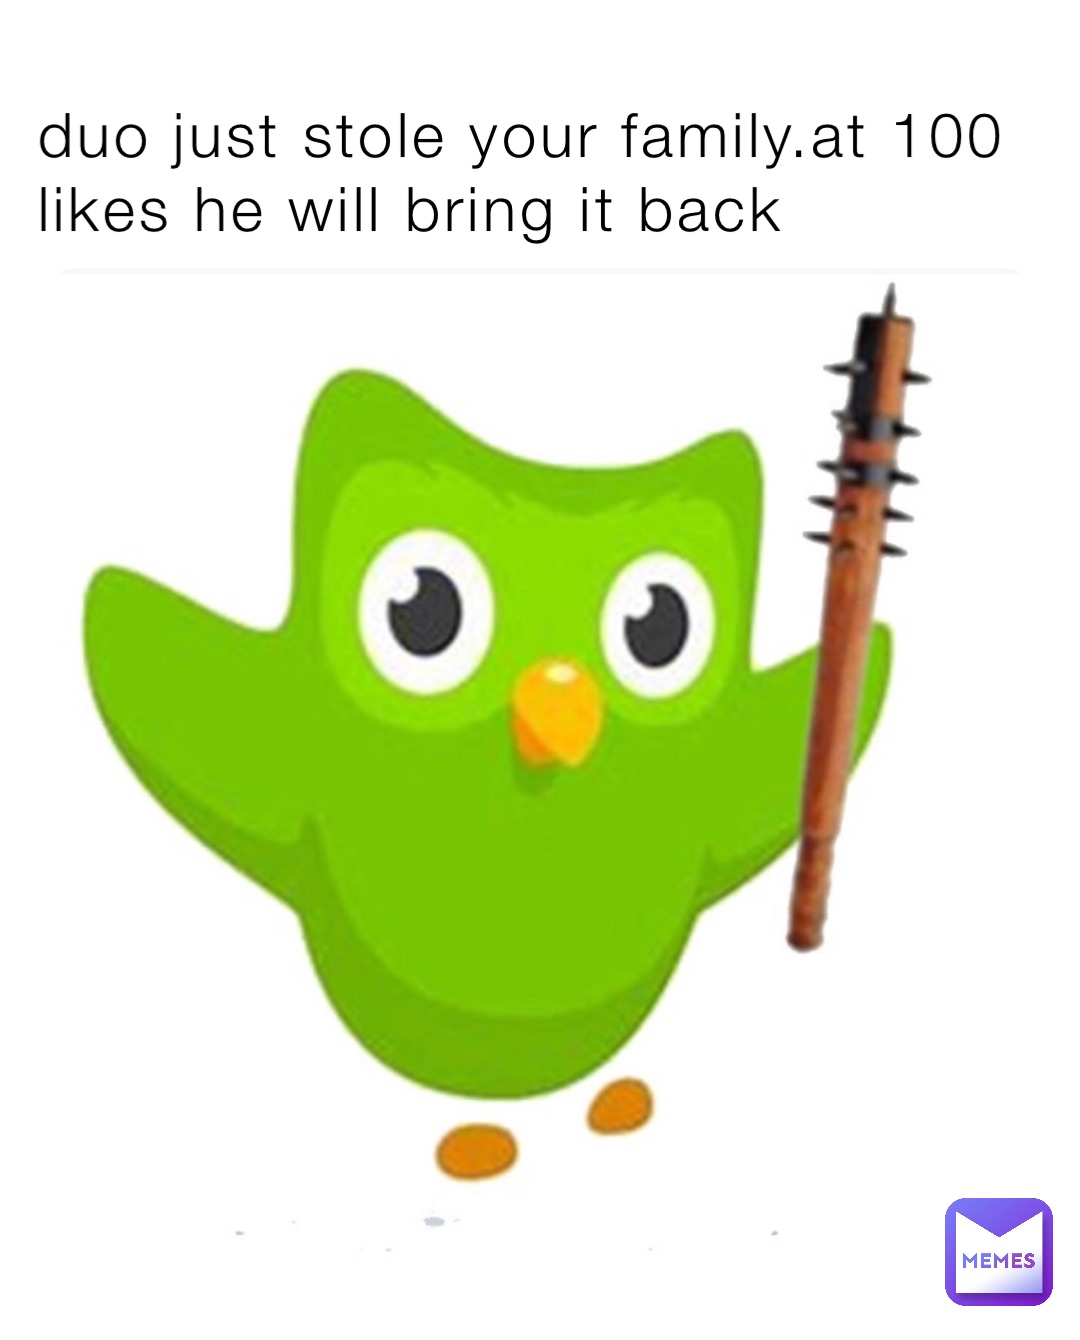 duo just stole your family.at 100 likes he will bring it back